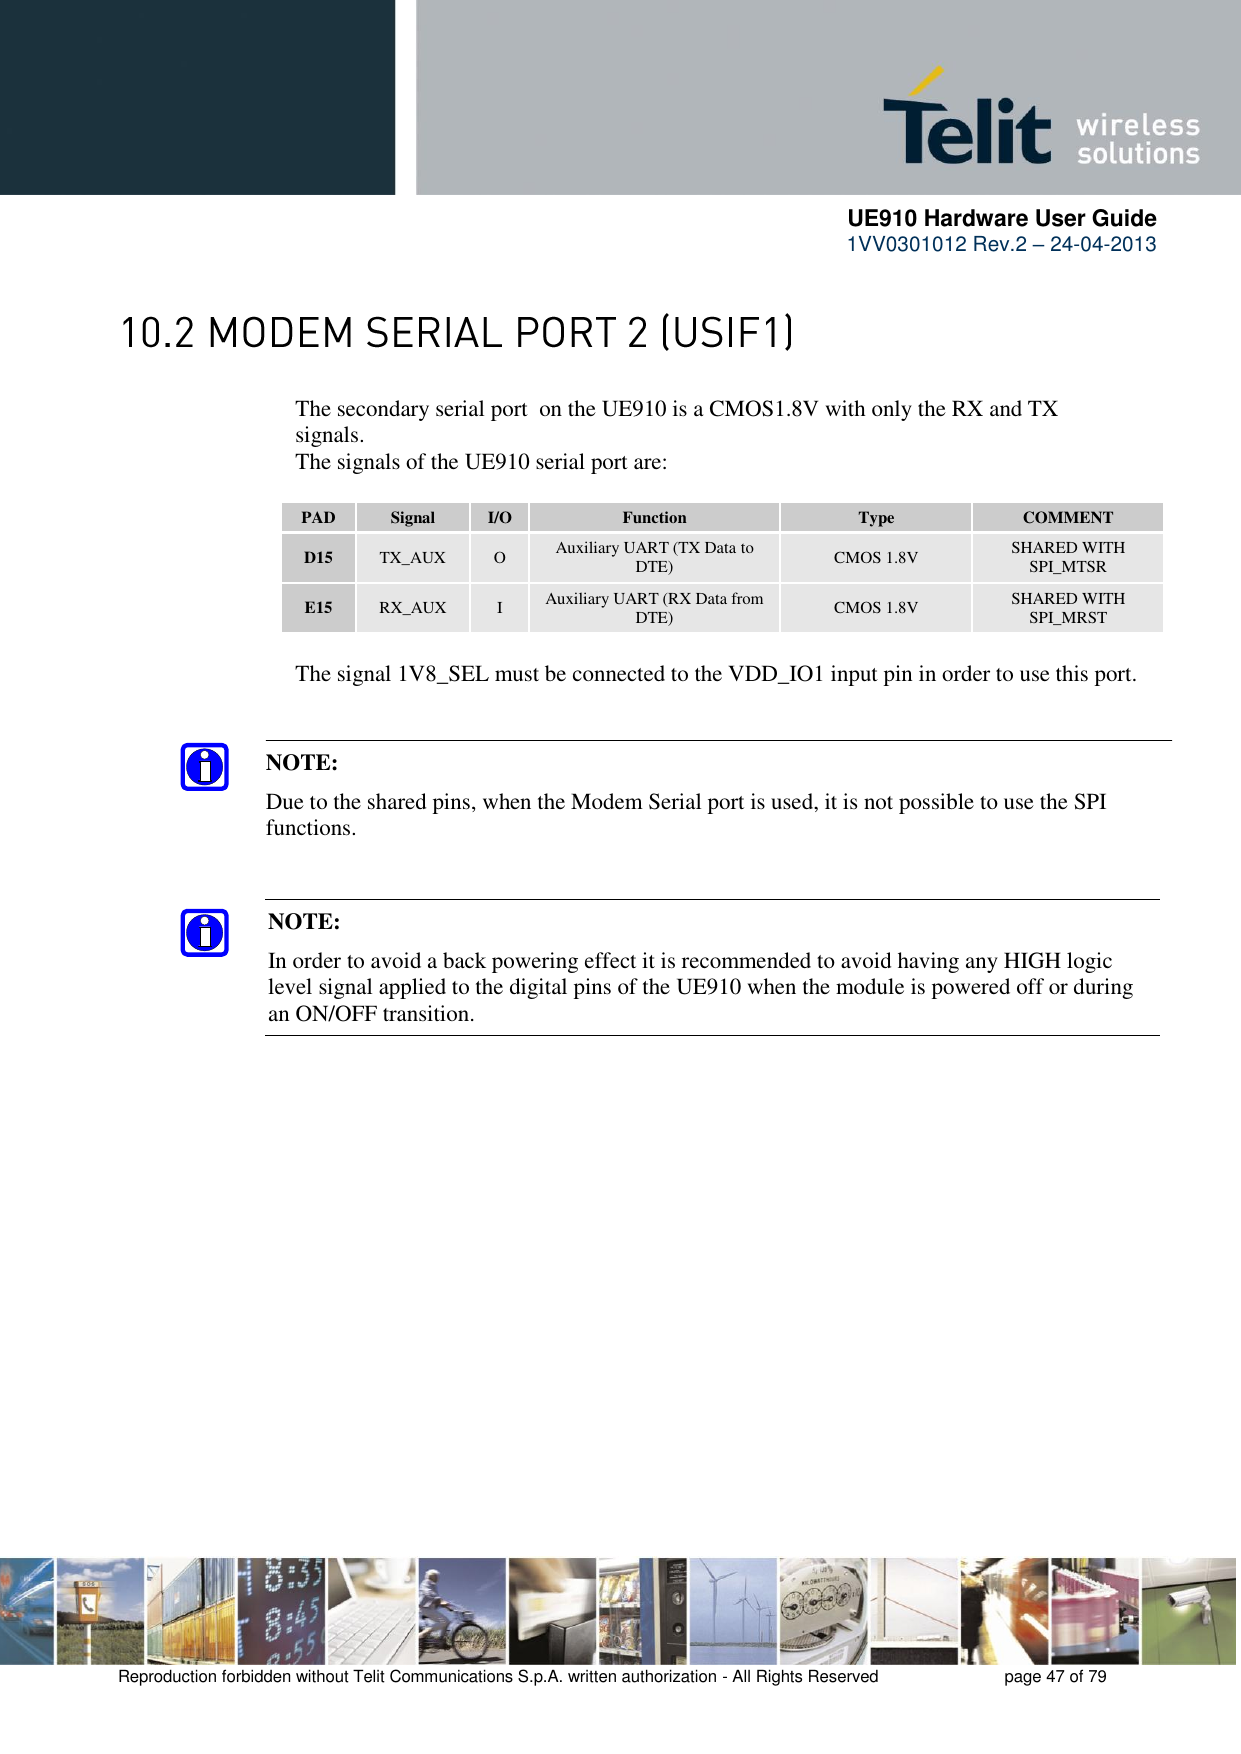      UE910 Hardware User Guide  1VV0301012 Rev.2 – 24-04-2013    Reproduction forbidden without Telit Communications S.p.A. written authorization - All Rights Reserved    page 47 of 79   The secondary serial port  on the UE910 is a CMOS1.8V with only the RX and TX      signals.      The signals of the UE910 serial port are:  PAD Signal I/O Function Type COMMENT D15 TX_AUX O Auxiliary UART (TX Data to DTE) CMOS 1.8V SHARED WITH SPI_MTSR E15 RX_AUX I Auxiliary UART (RX Data from DTE) CMOS 1.8V SHARED WITH SPI_MRST    The signal 1V8_SEL must be connected to the VDD_IO1 input pin in order to use this port.  NOTE: In order to avoid a back powering effect it is recommended to avoid having any HIGH logic level signal applied to the digital pins of the UE910 when the module is powered off or during an ON/OFF transition. NOTE:  Due to the shared pins, when the Modem Serial port is used, it is not possible to use the SPI functions. 